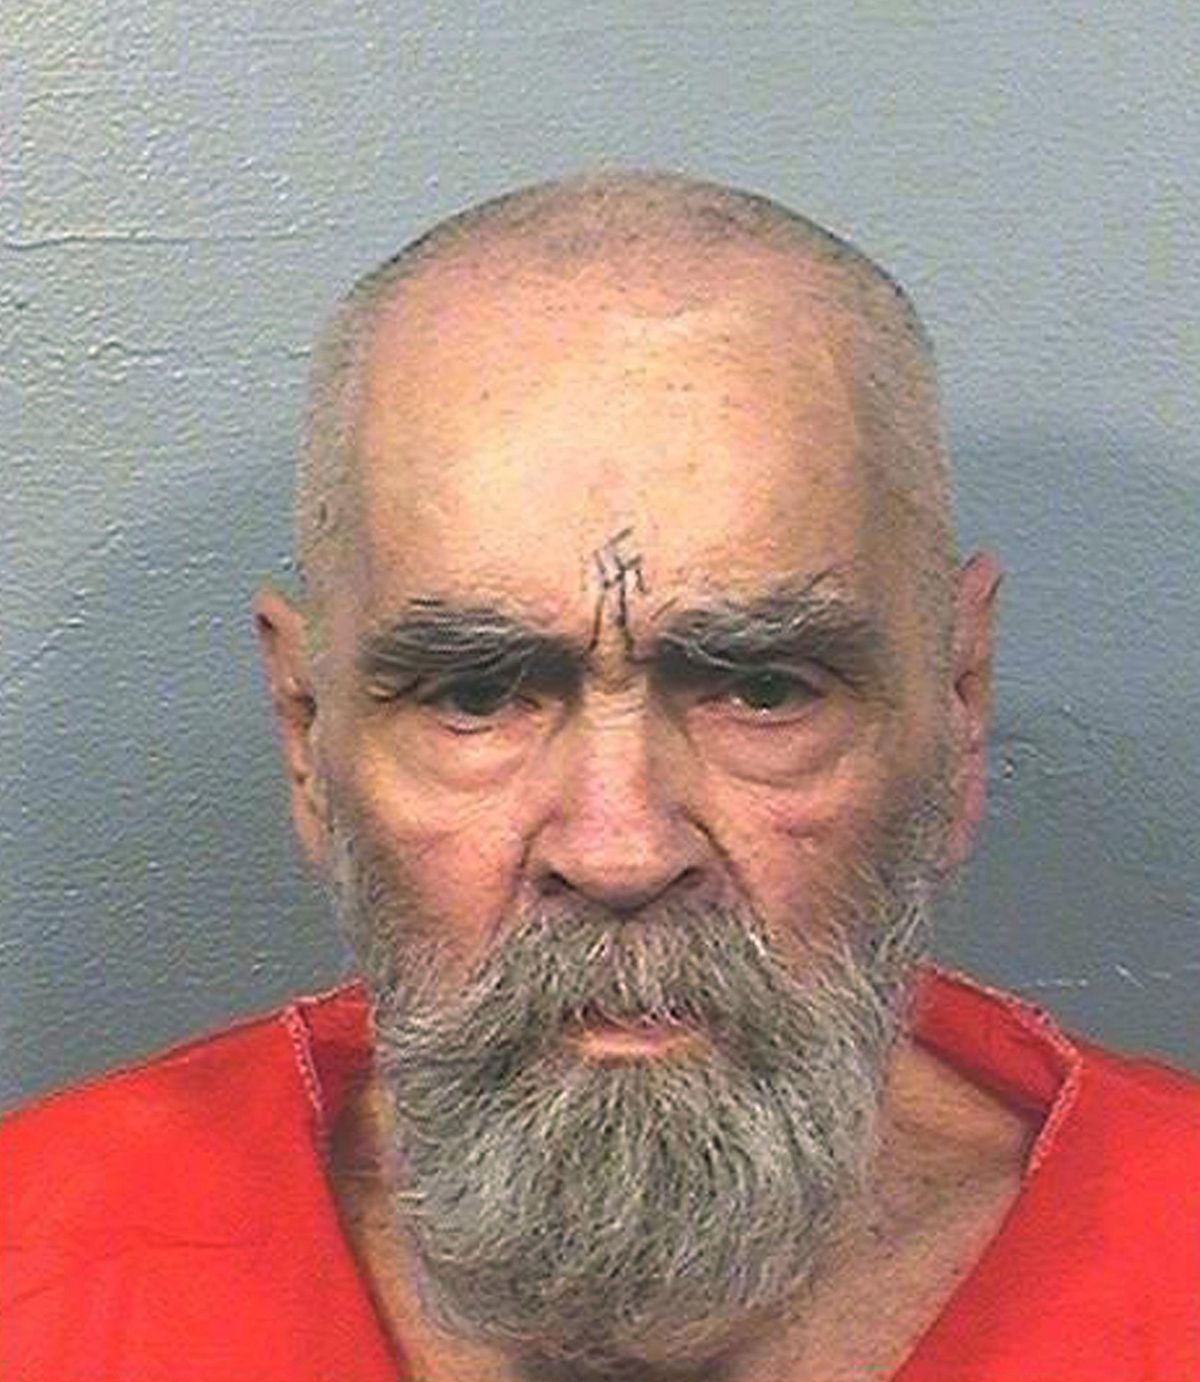 This Aug. 14, 2017, file photo provided by the California Department of Corrections and Rehabilitation shows Charles Manson. Manson died Nov. 19 of cardiac arrest accompanied by respiratory failure, triggered by colon cancer that had spread to other areas of his body. (Uncredited / California Department of Corrections and Rehabilitation via AP)